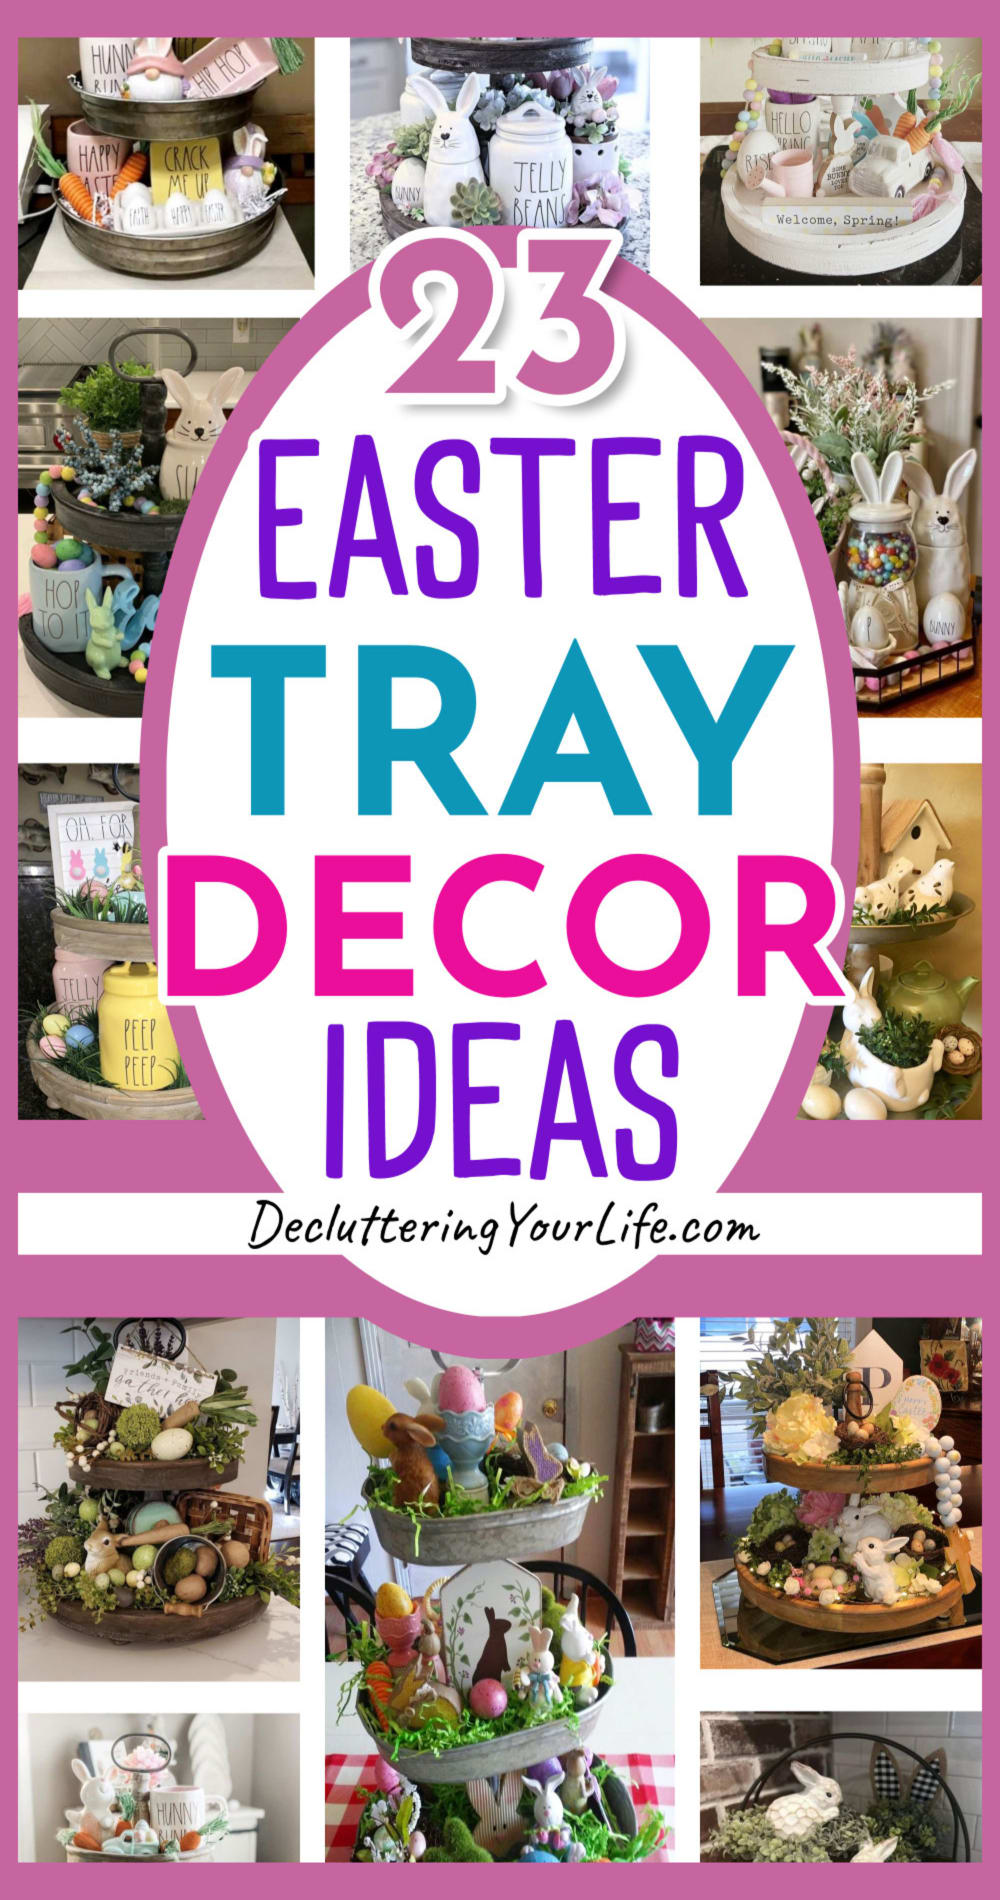 Easter tray decor ideas - 23 Spring decorating ideas for your wood tray, tiered tray or wooden tier tray for Easter decorations and Springtime table centerpiece ideas